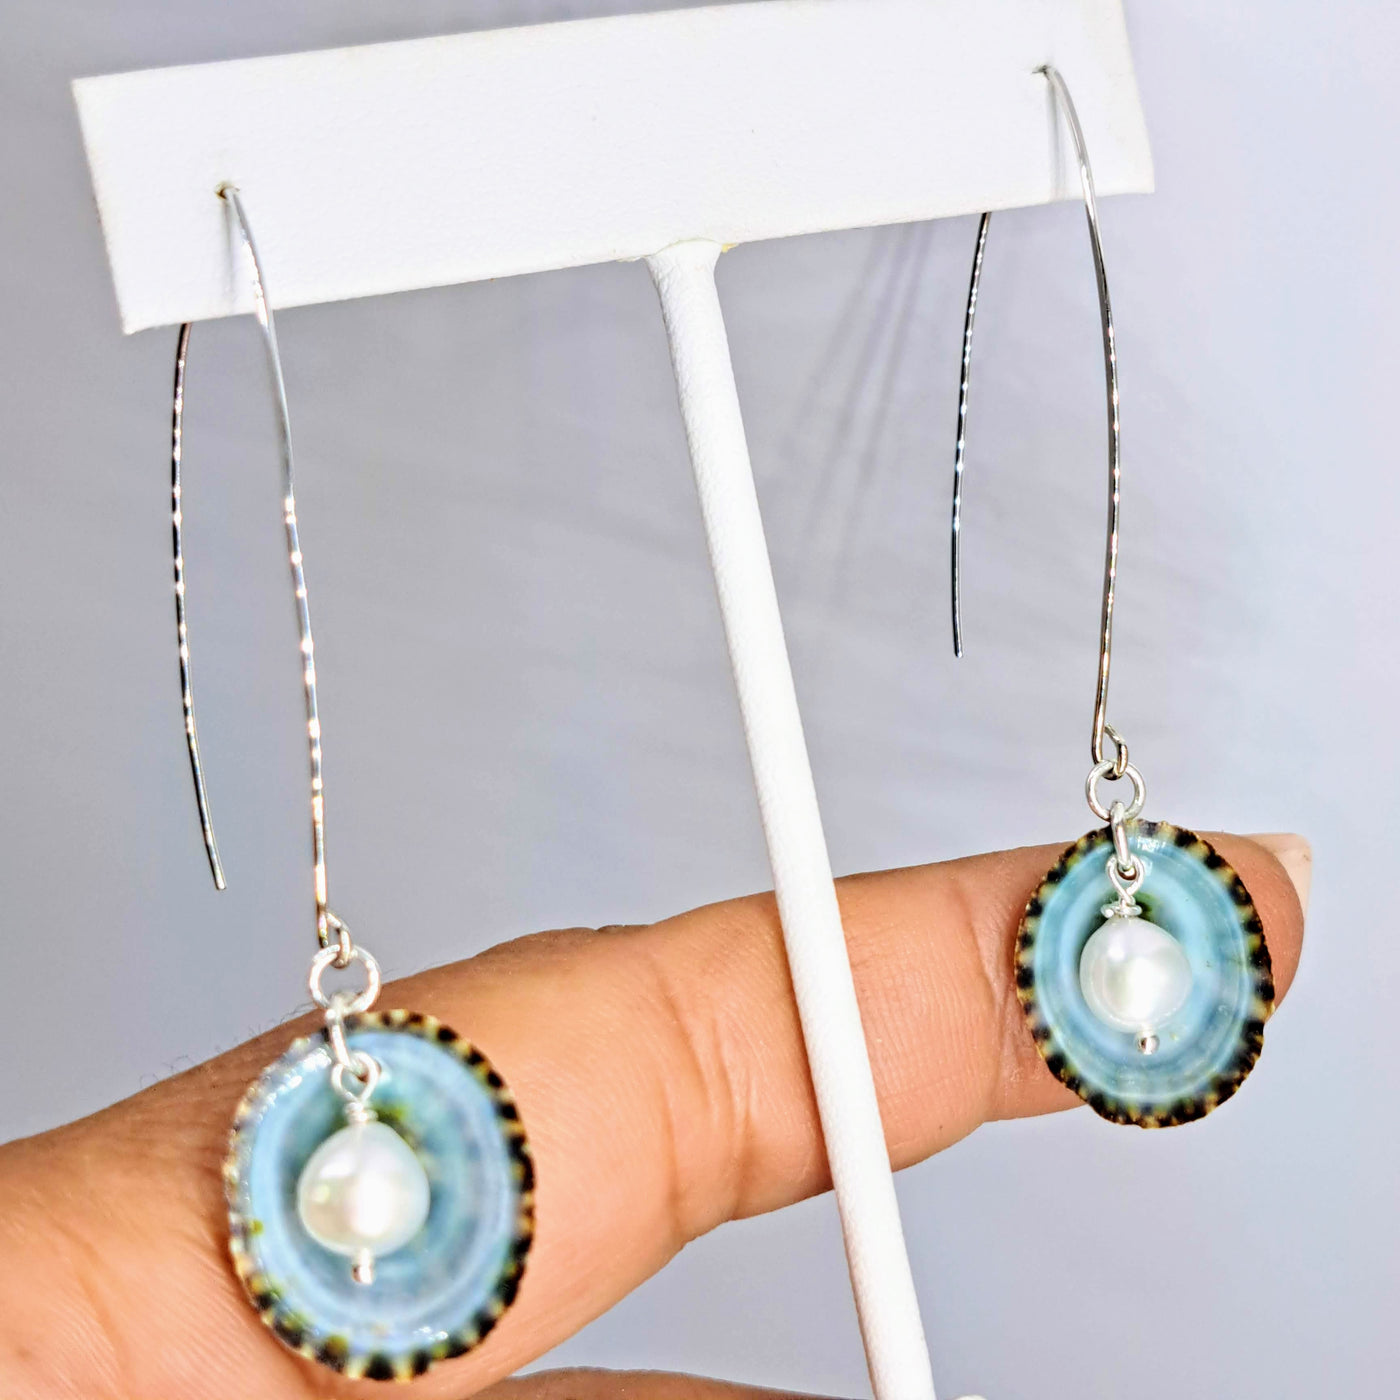 "Limpet Pools" Earrings - (2 Styles) Limpet Shells, Pearls, Sterling